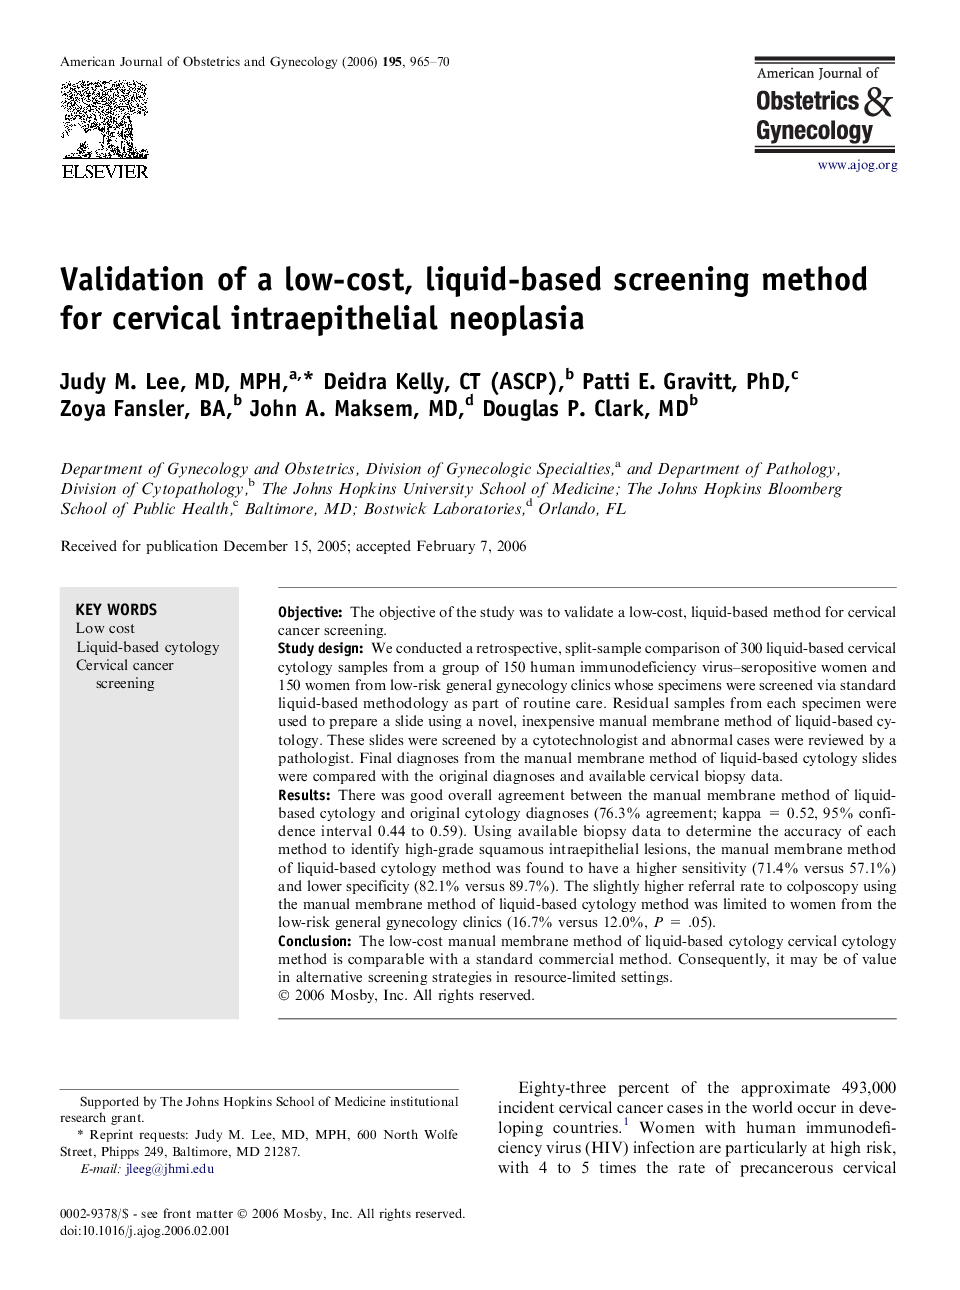 Validation of a low-cost, liquid-based screening method for cervical intraepithelial neoplasia 